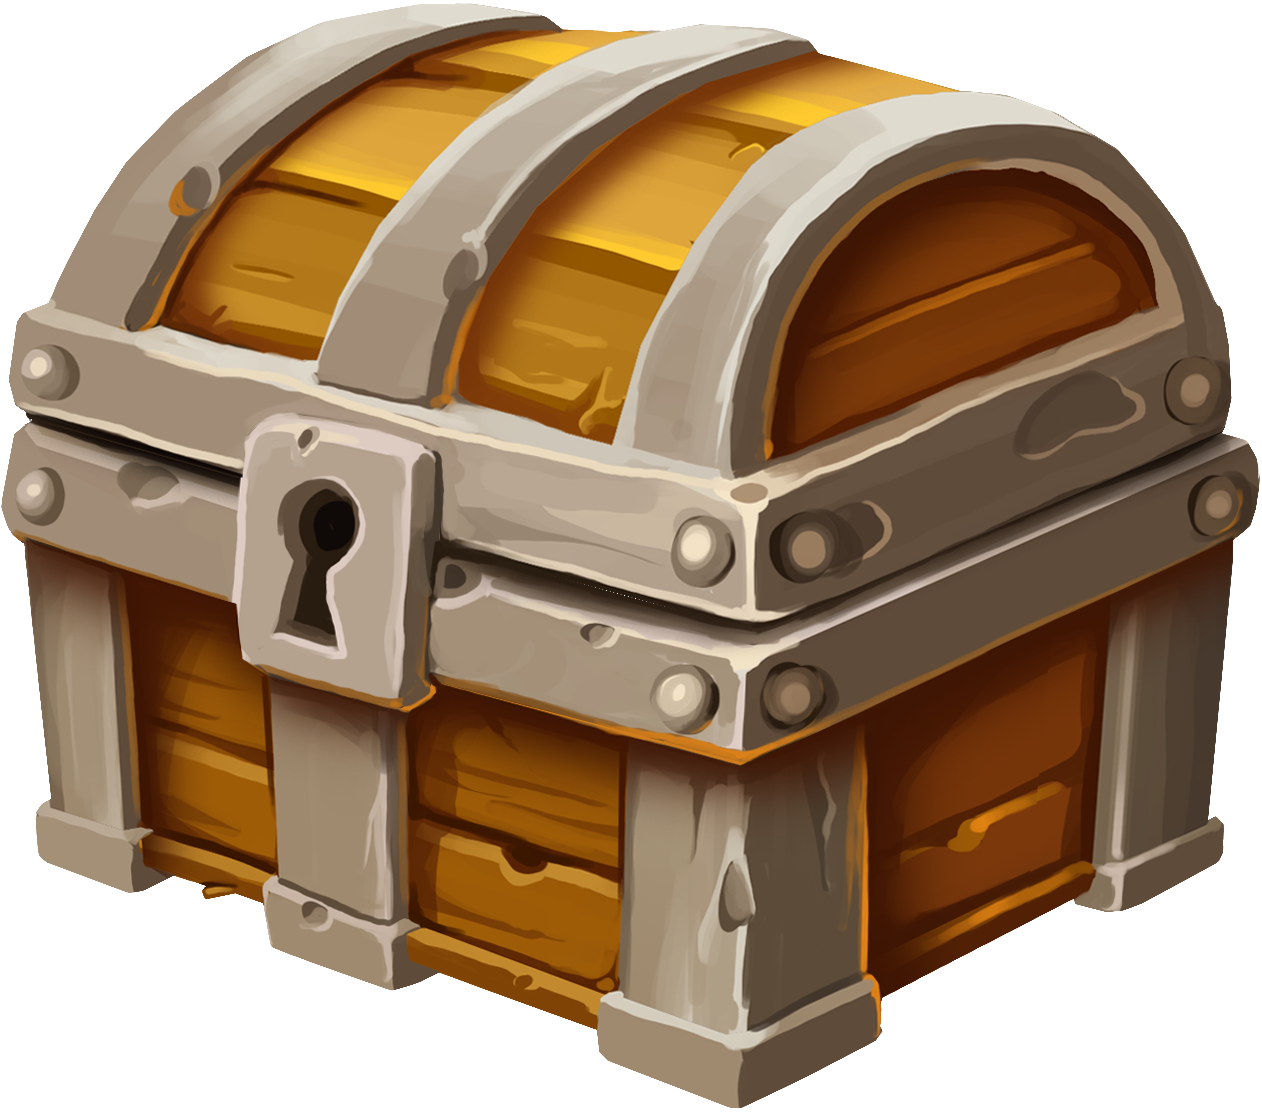 Closed Treasure Chest PNG Clipart - PNG All